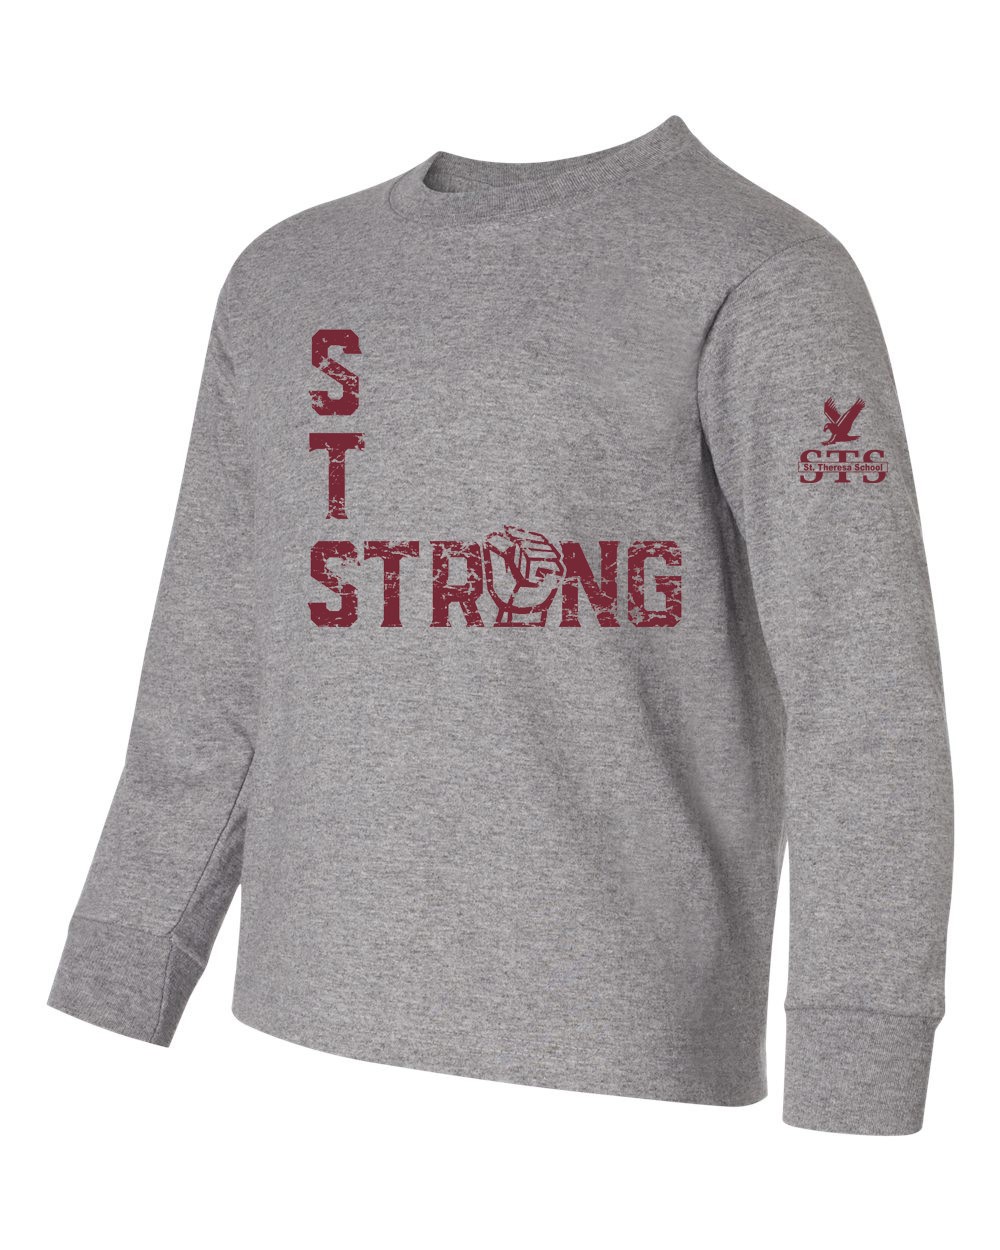 STS Strong L/S Fist Spirit T-Shirt w/ Maroon Logo - Please Allow 2-3 Weeks for Delivery